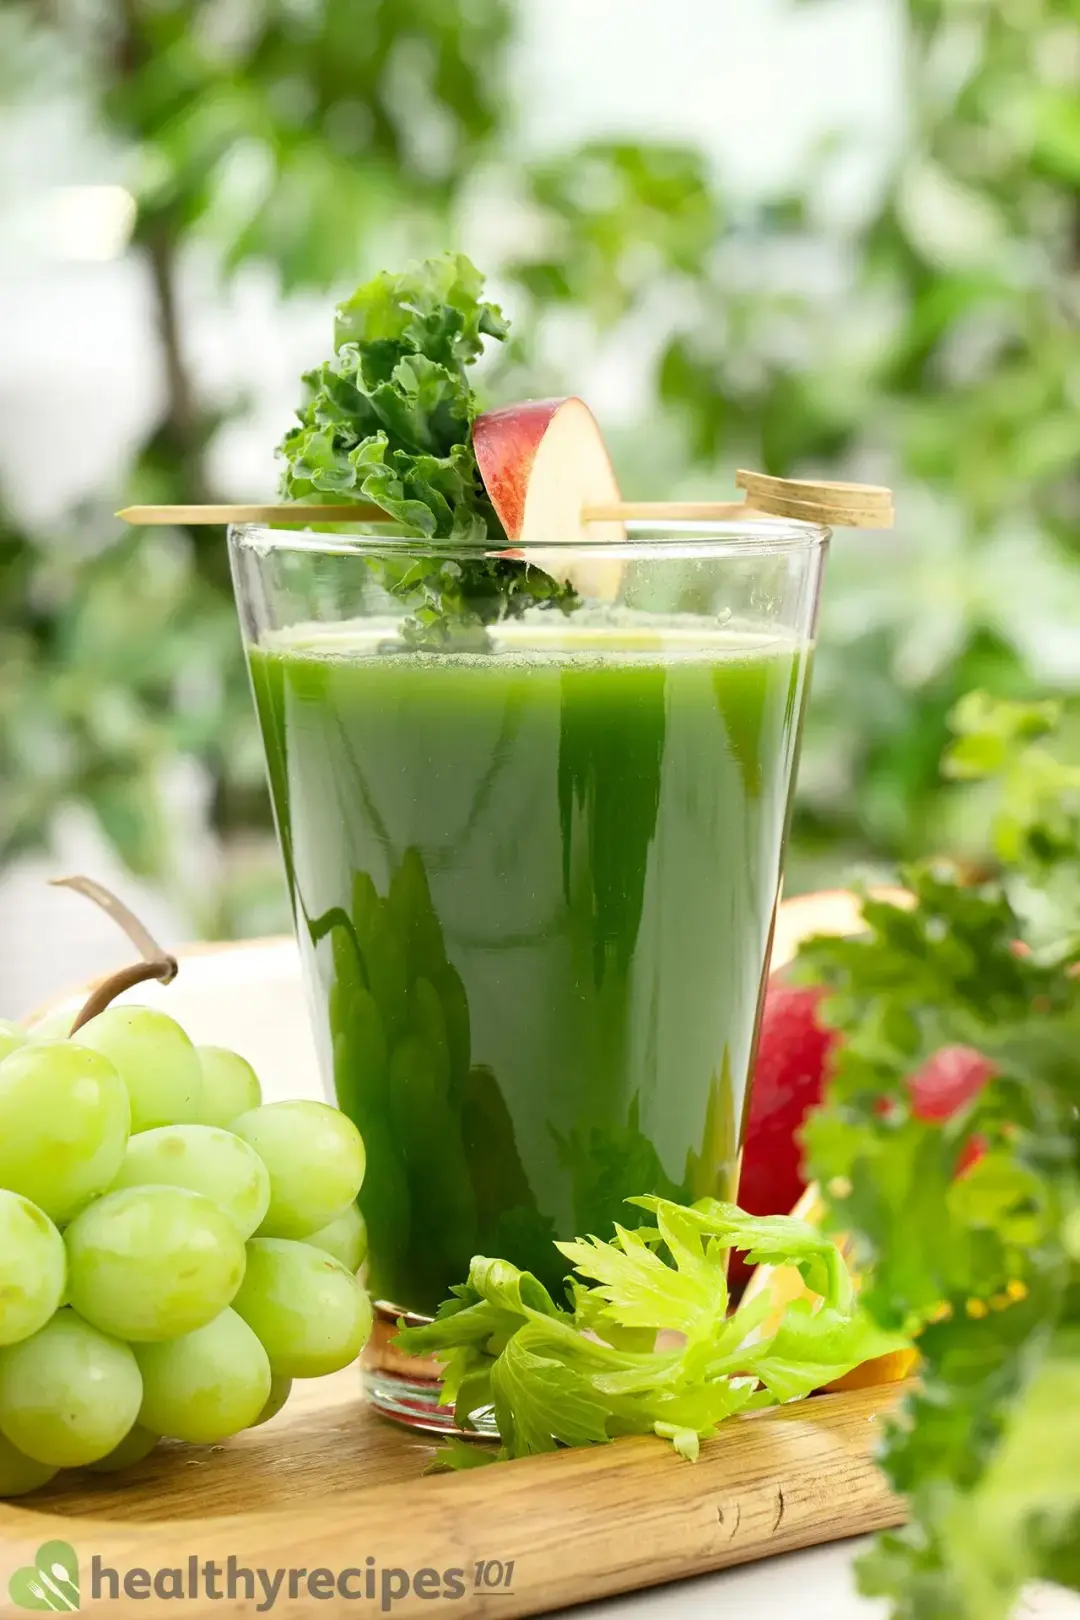 A glass of green machine juice on a wooden board surrounded by some green grapes, lettuce leaves, and an apple